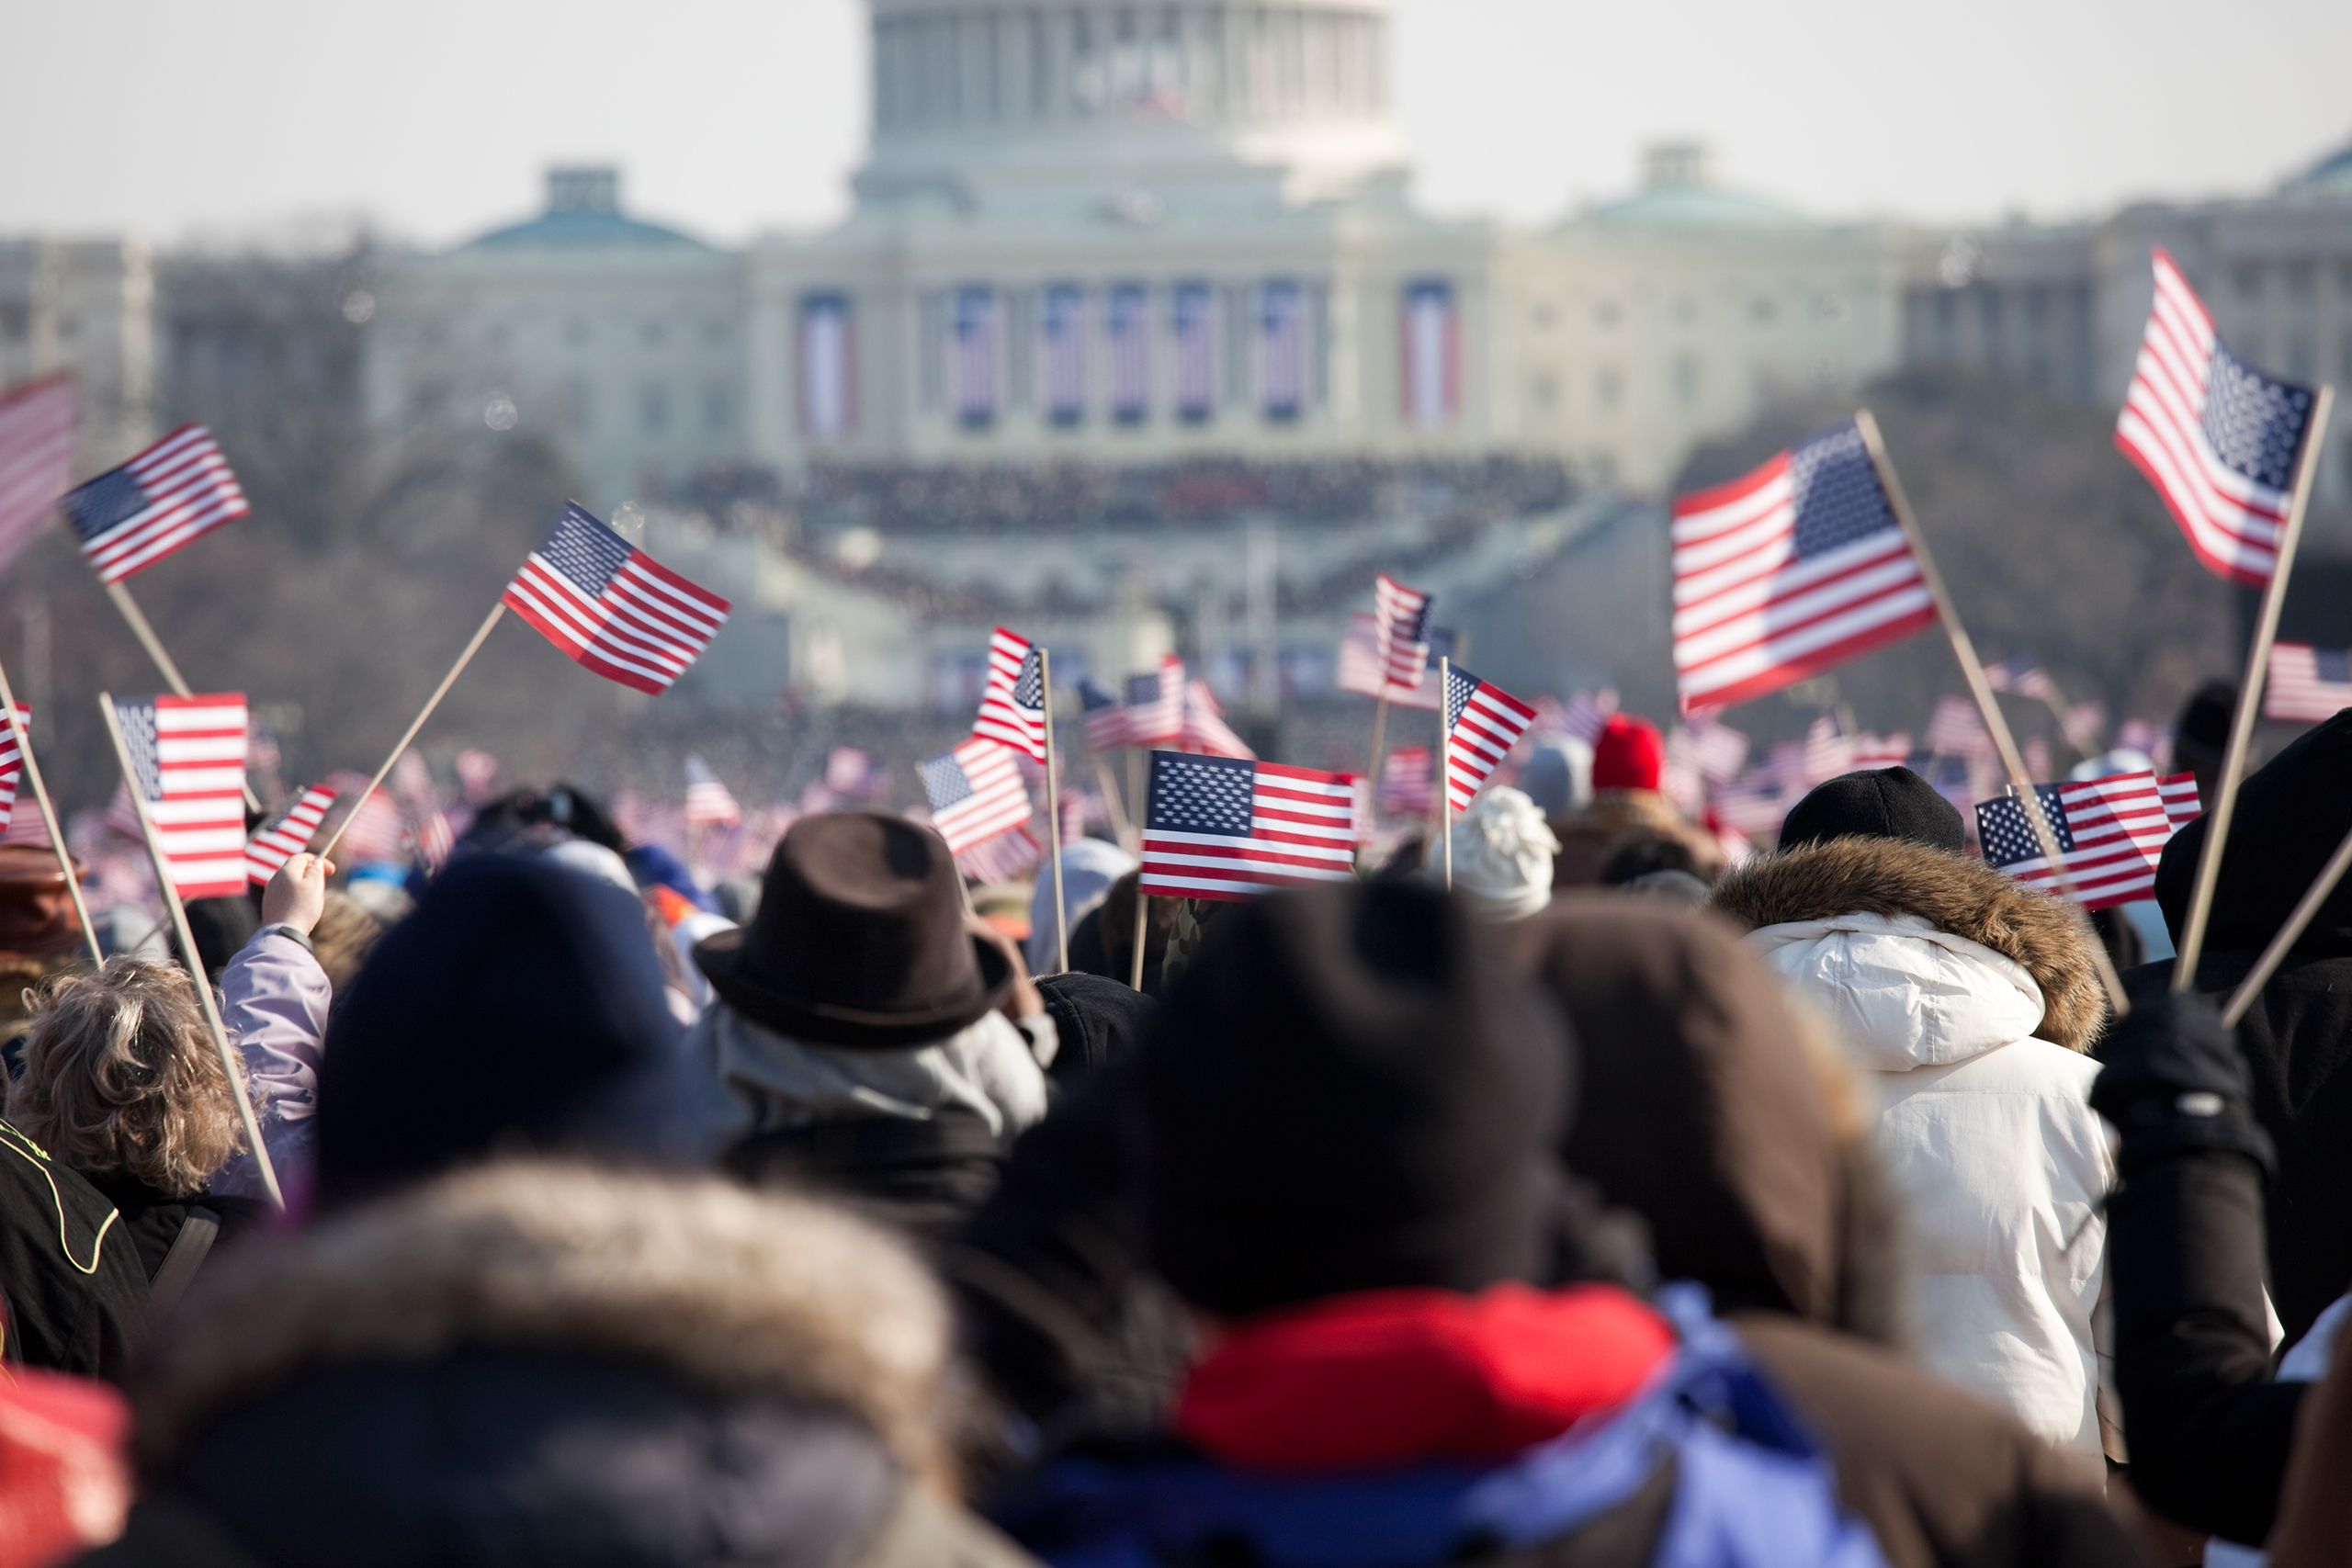 A view of the crowd at President Barack Obama's inauguration in Washington on Jan. 20, 2009. (Getty Images)